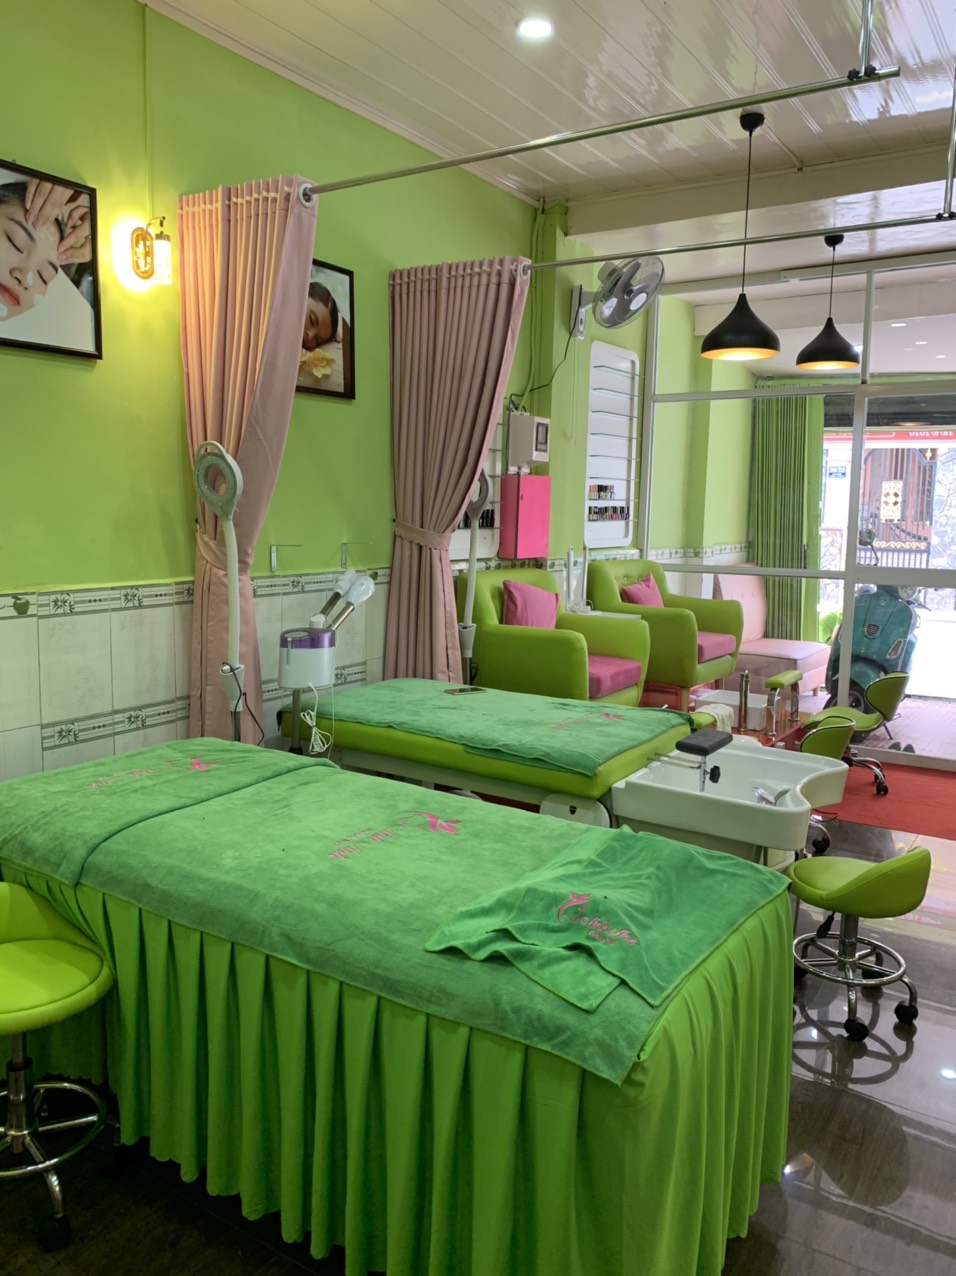 ANH ANH- BEAUTY SPA